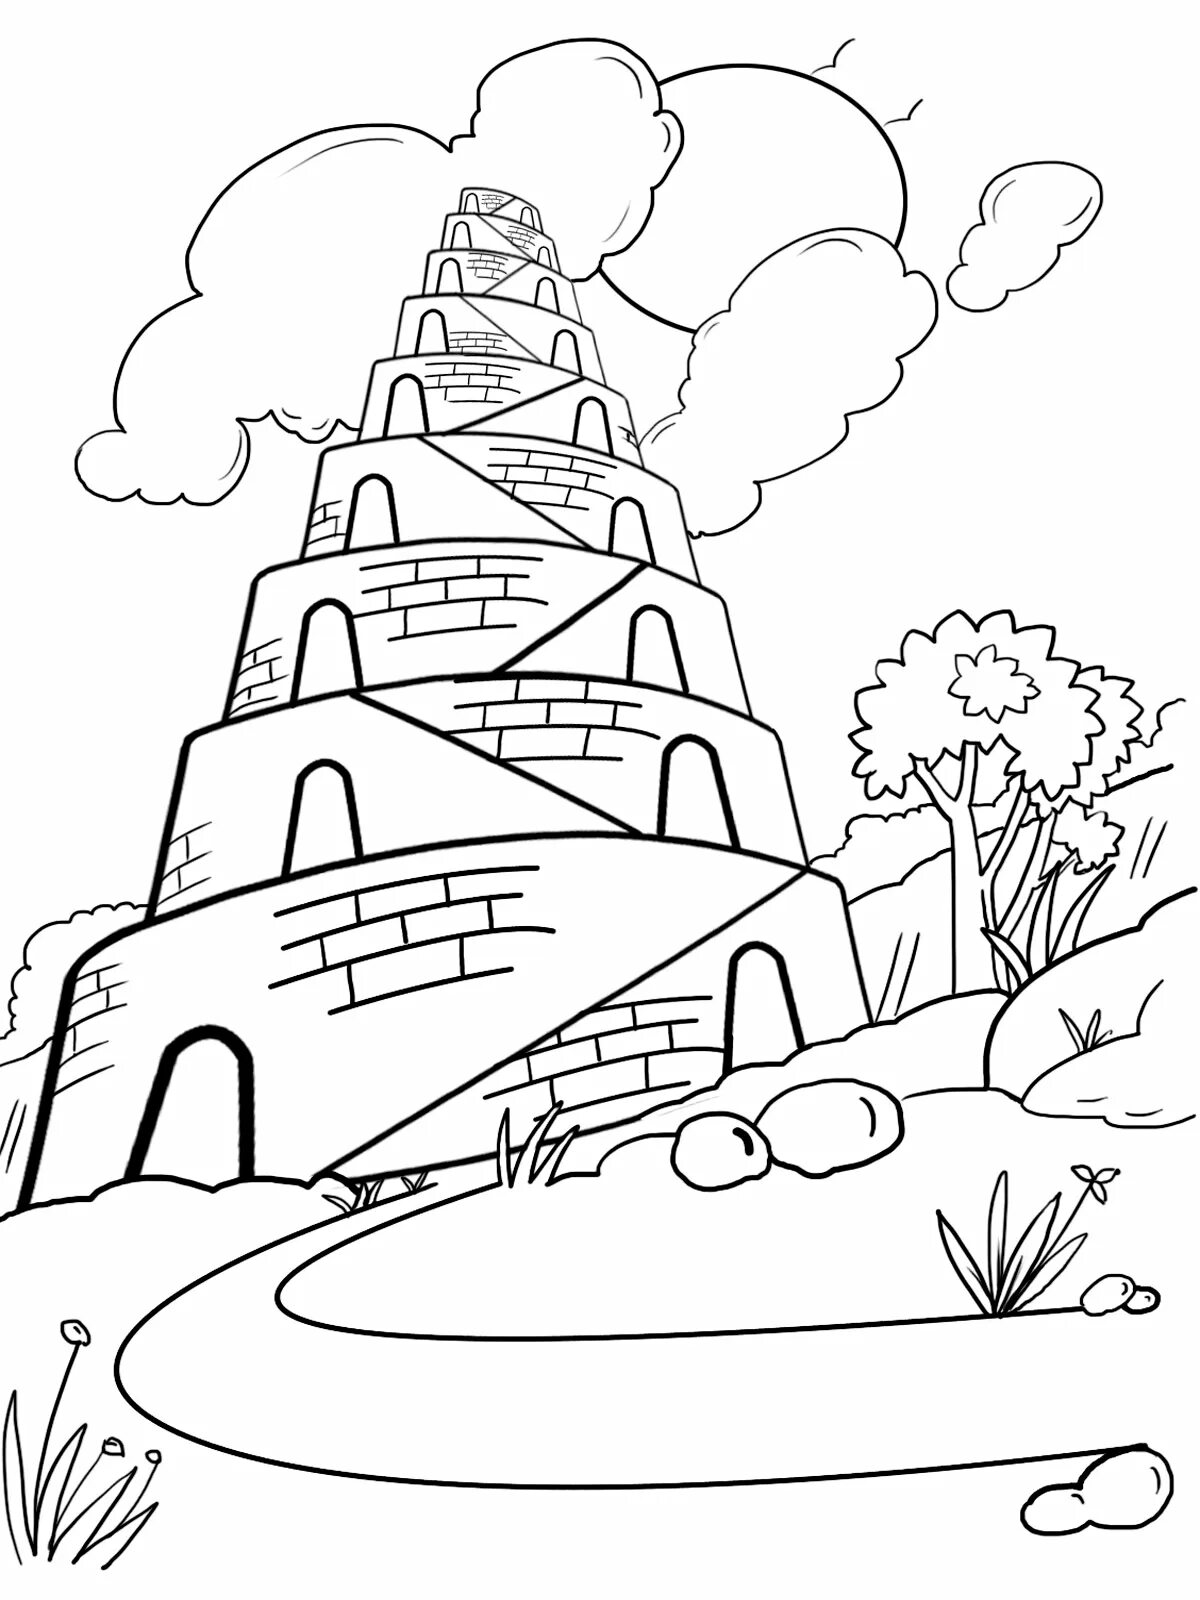 Tower of Babel for kids #8